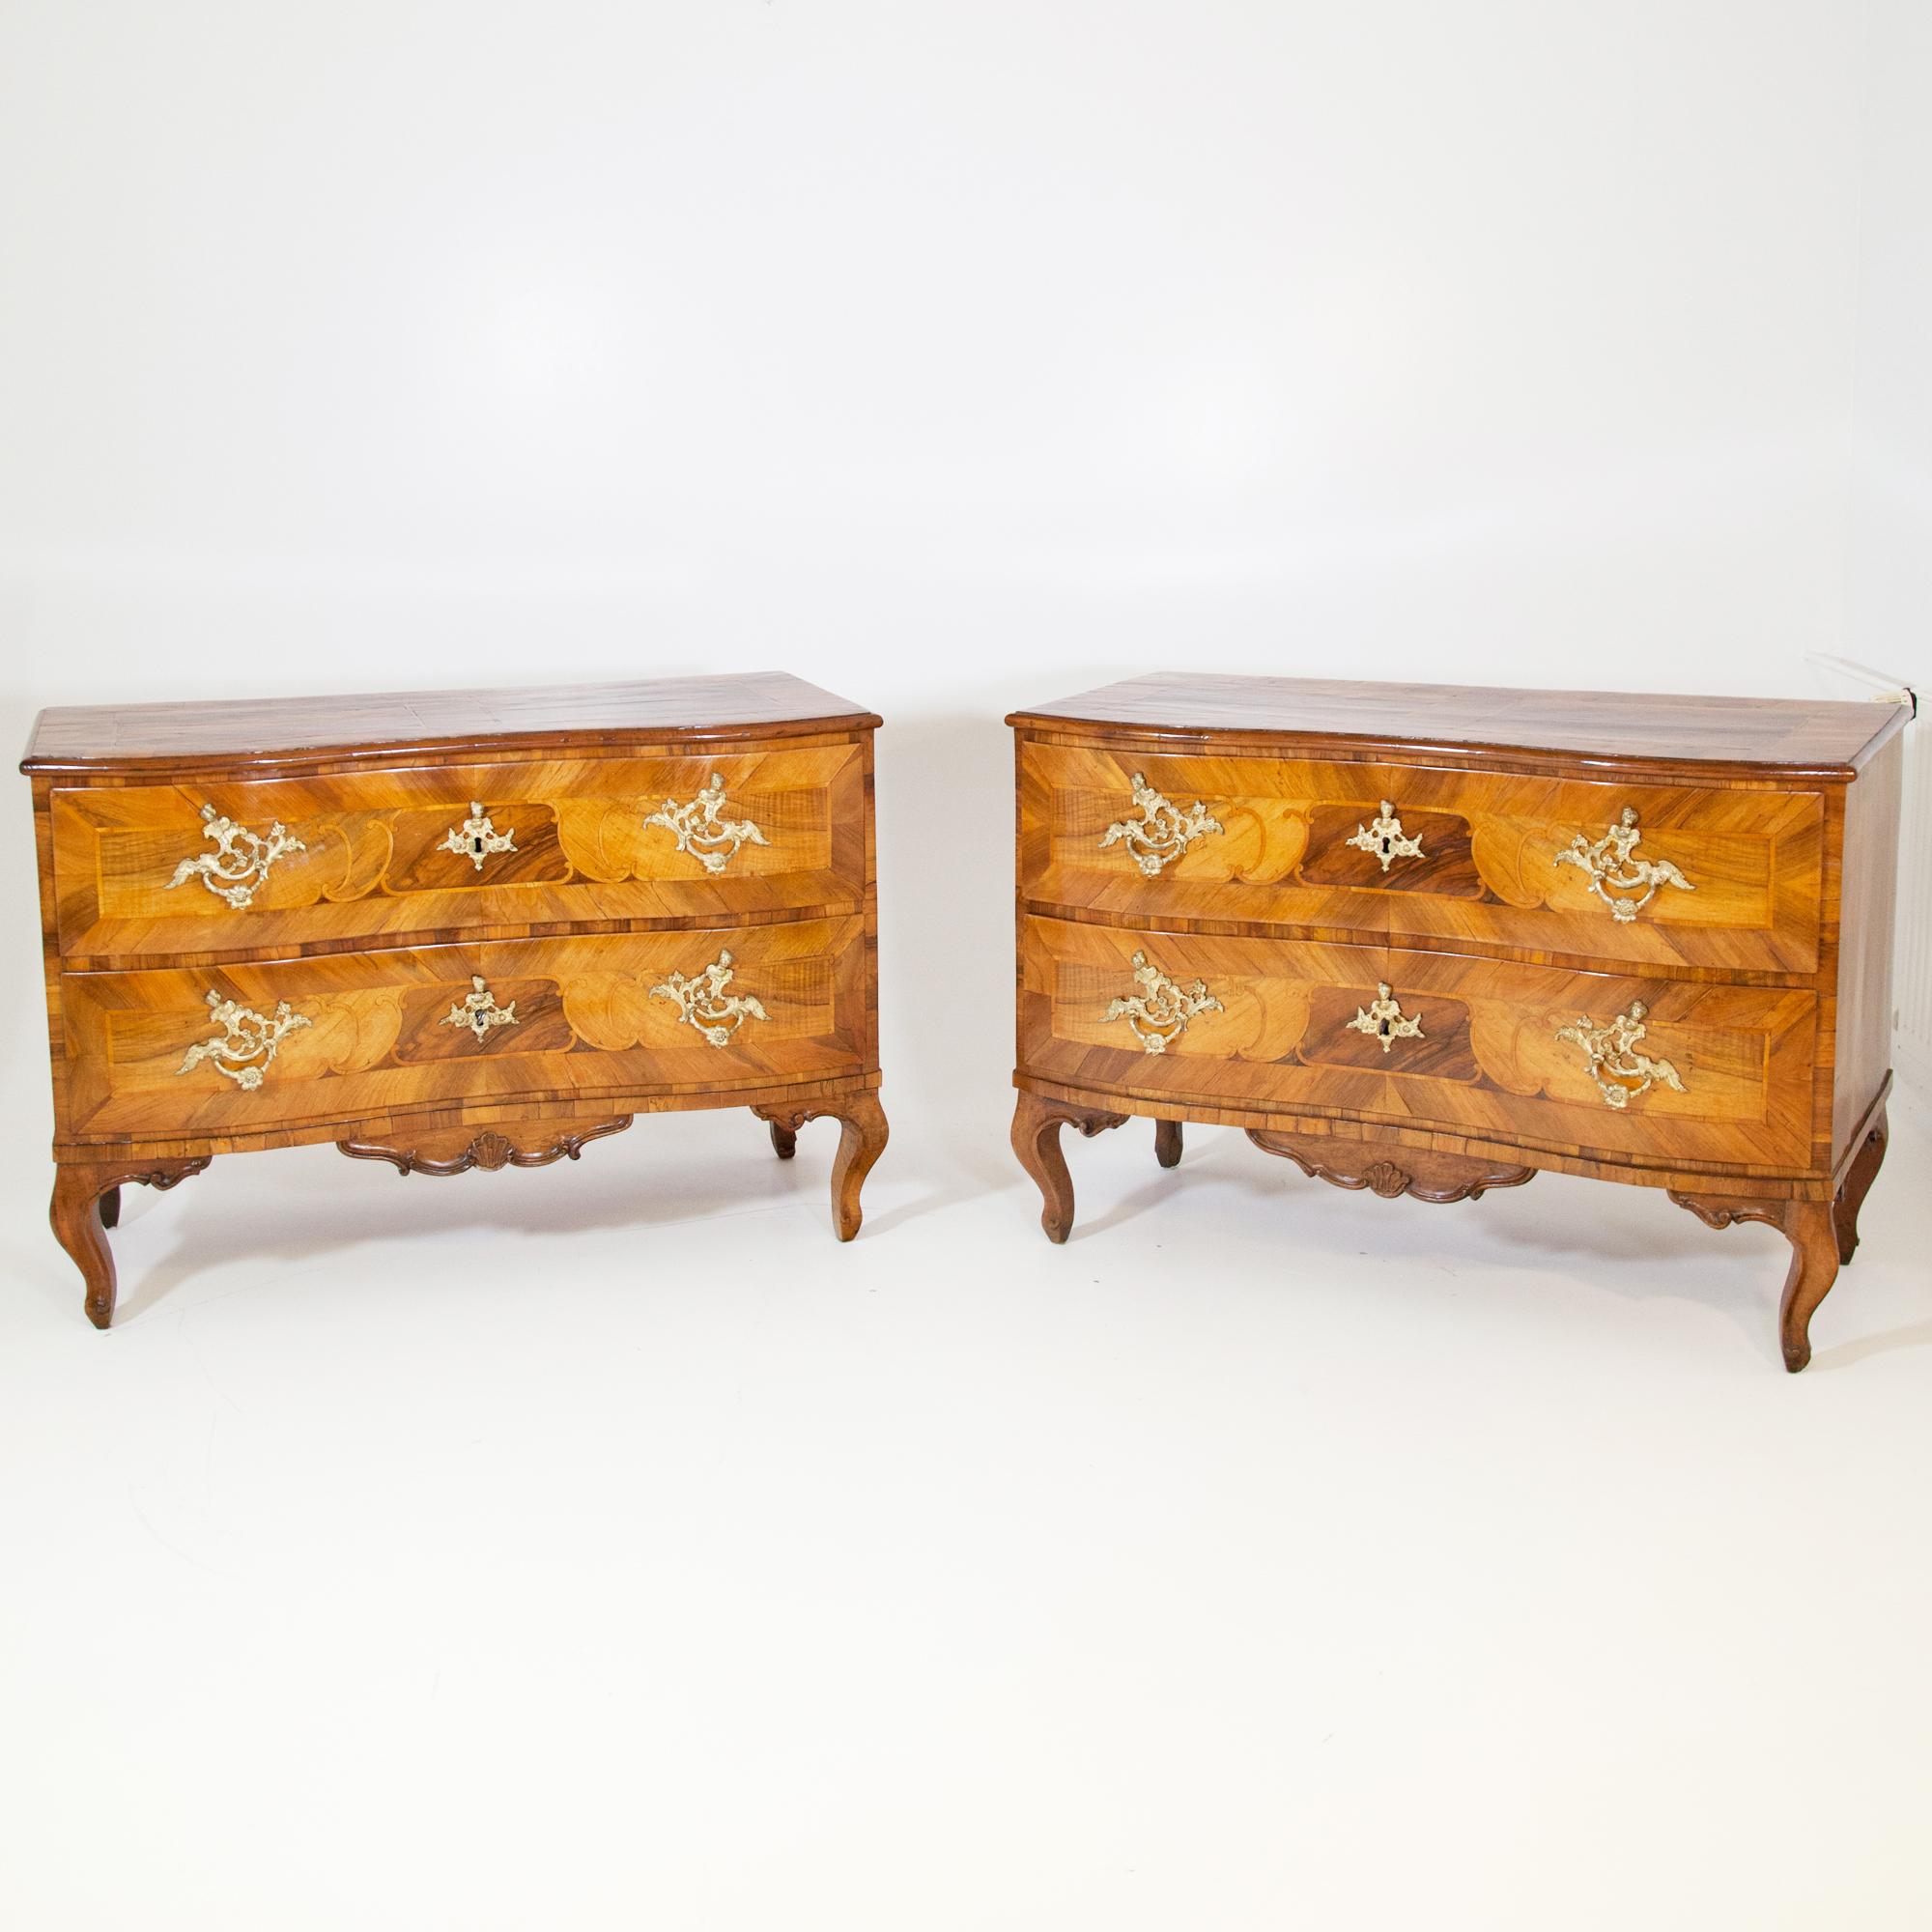 Two-drawered walnut chests of drawers standing on curved legs, with slightly curved fronts and carved aprons with shell motifs. The drawers are decorated with strap work and fire-gilded original bronze fittings. Museum-like, original condition with